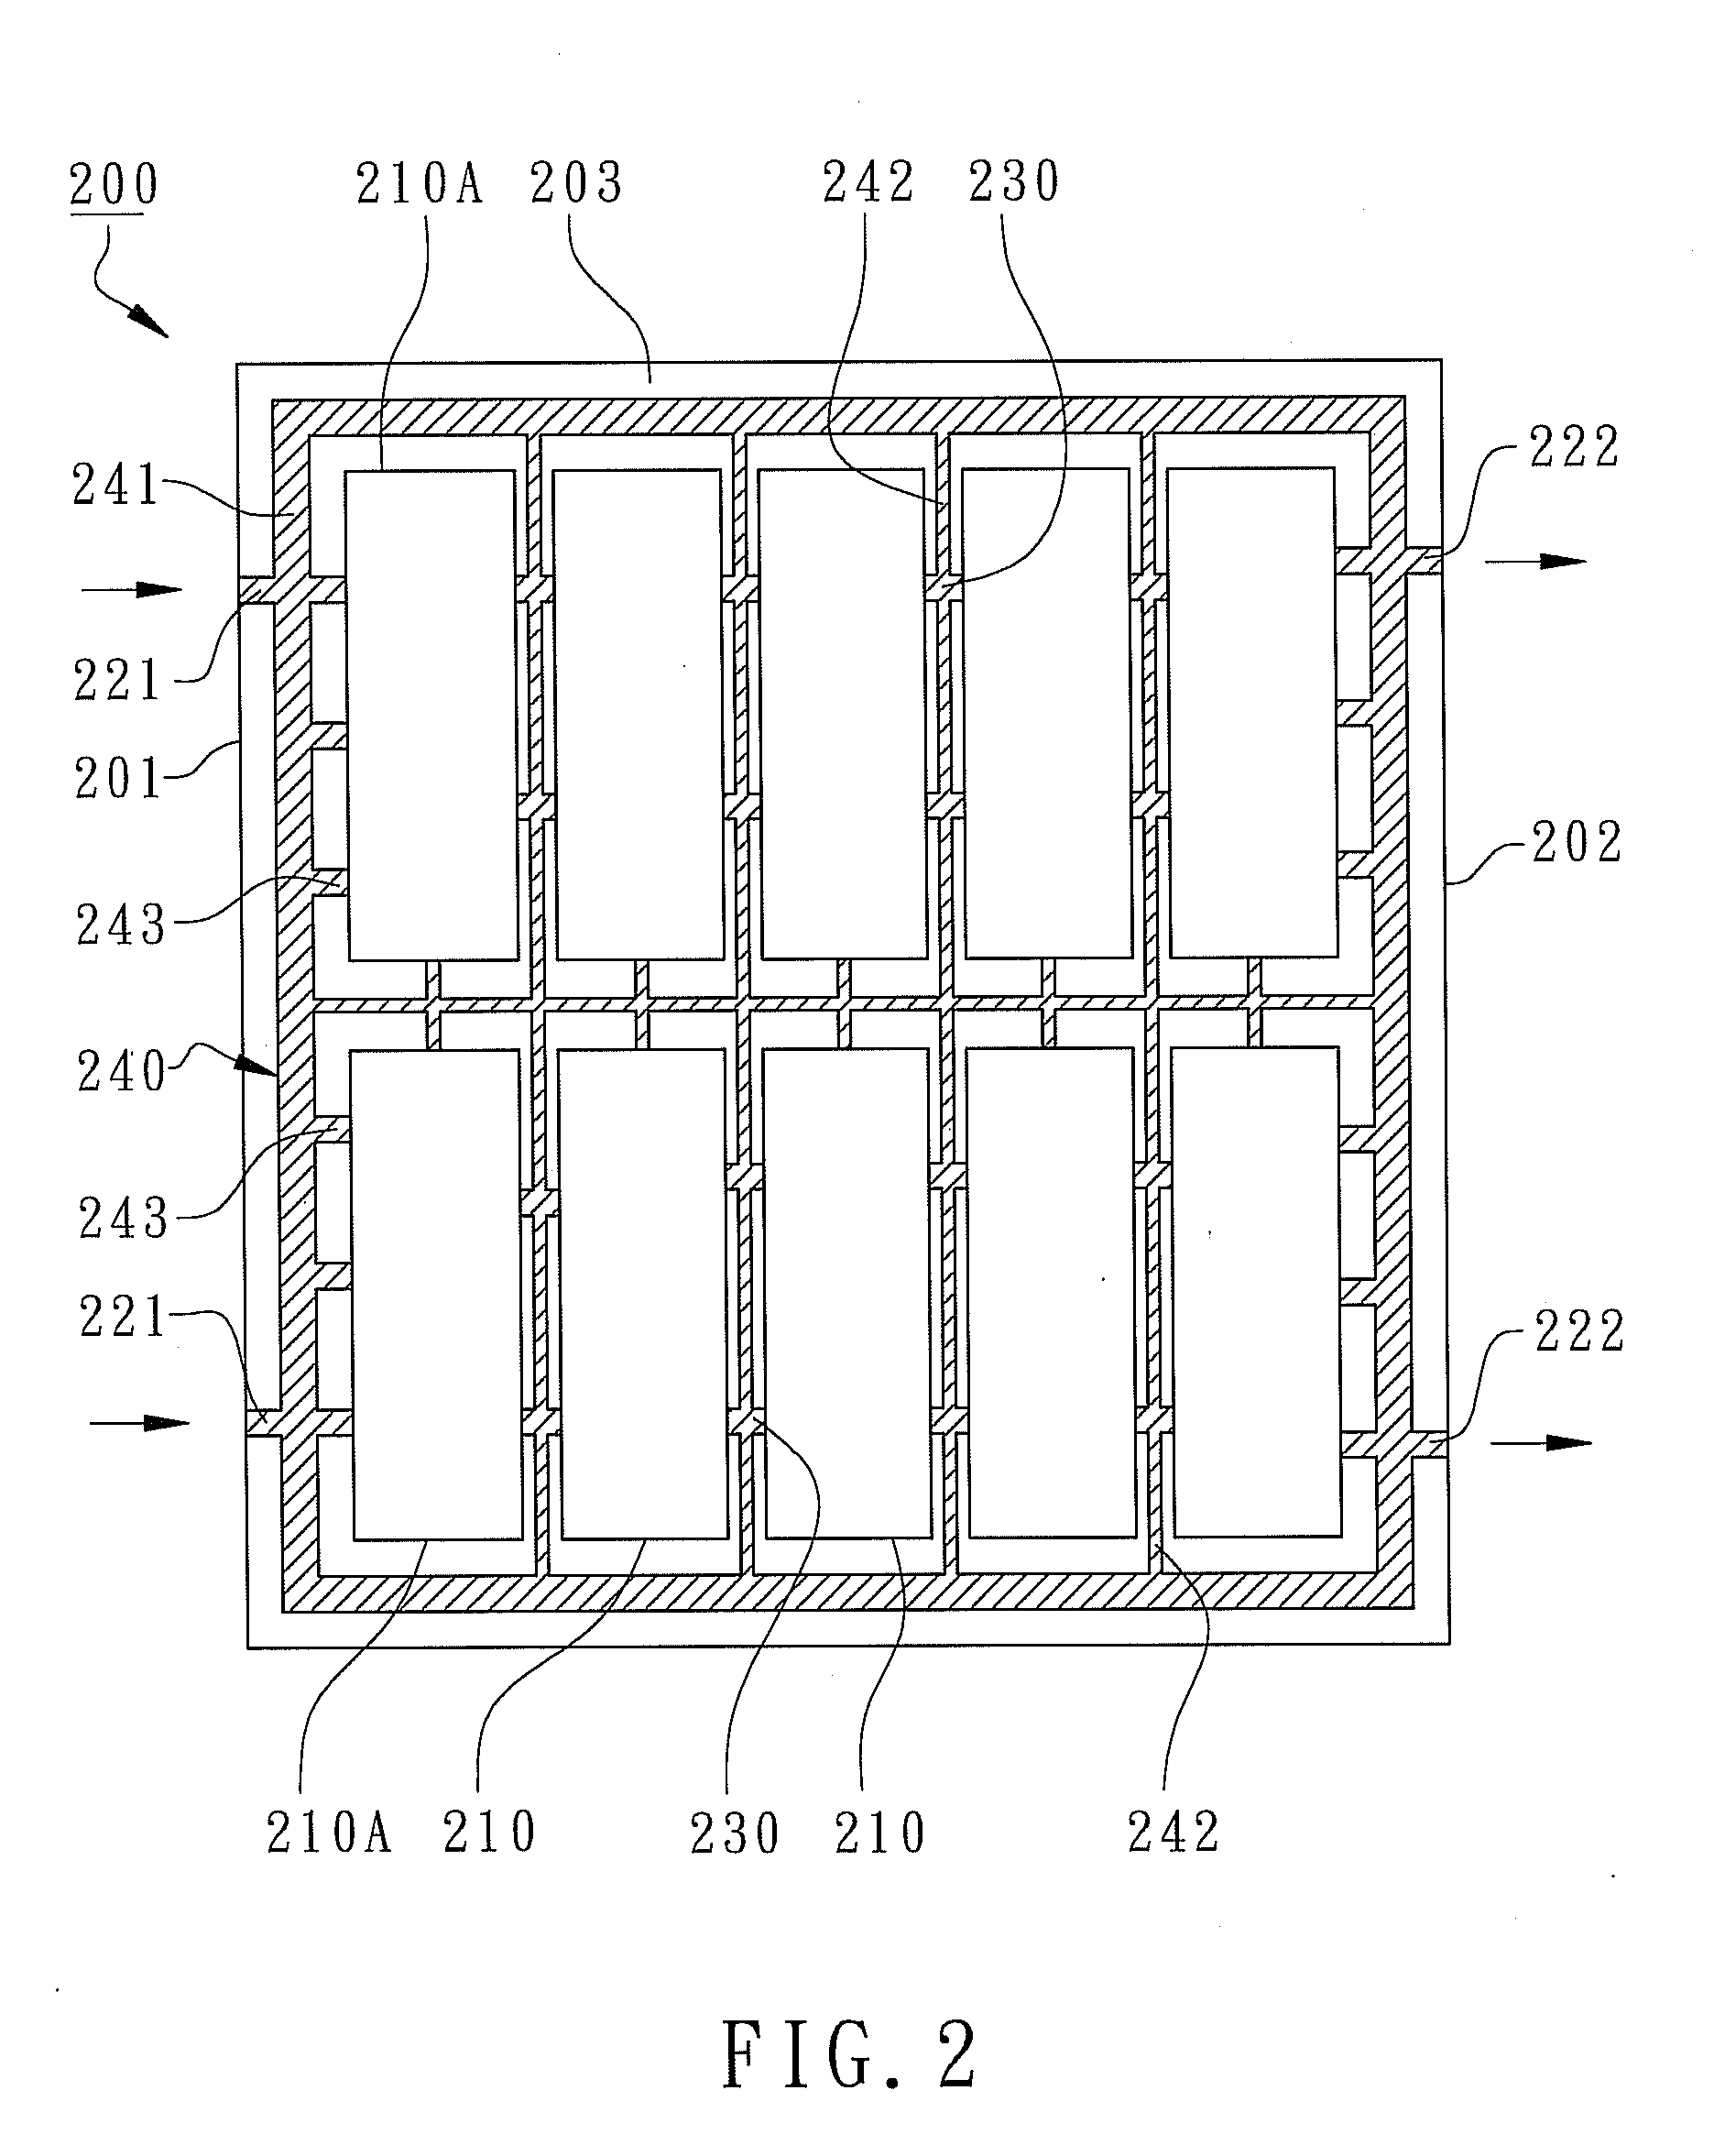 Substrate panel